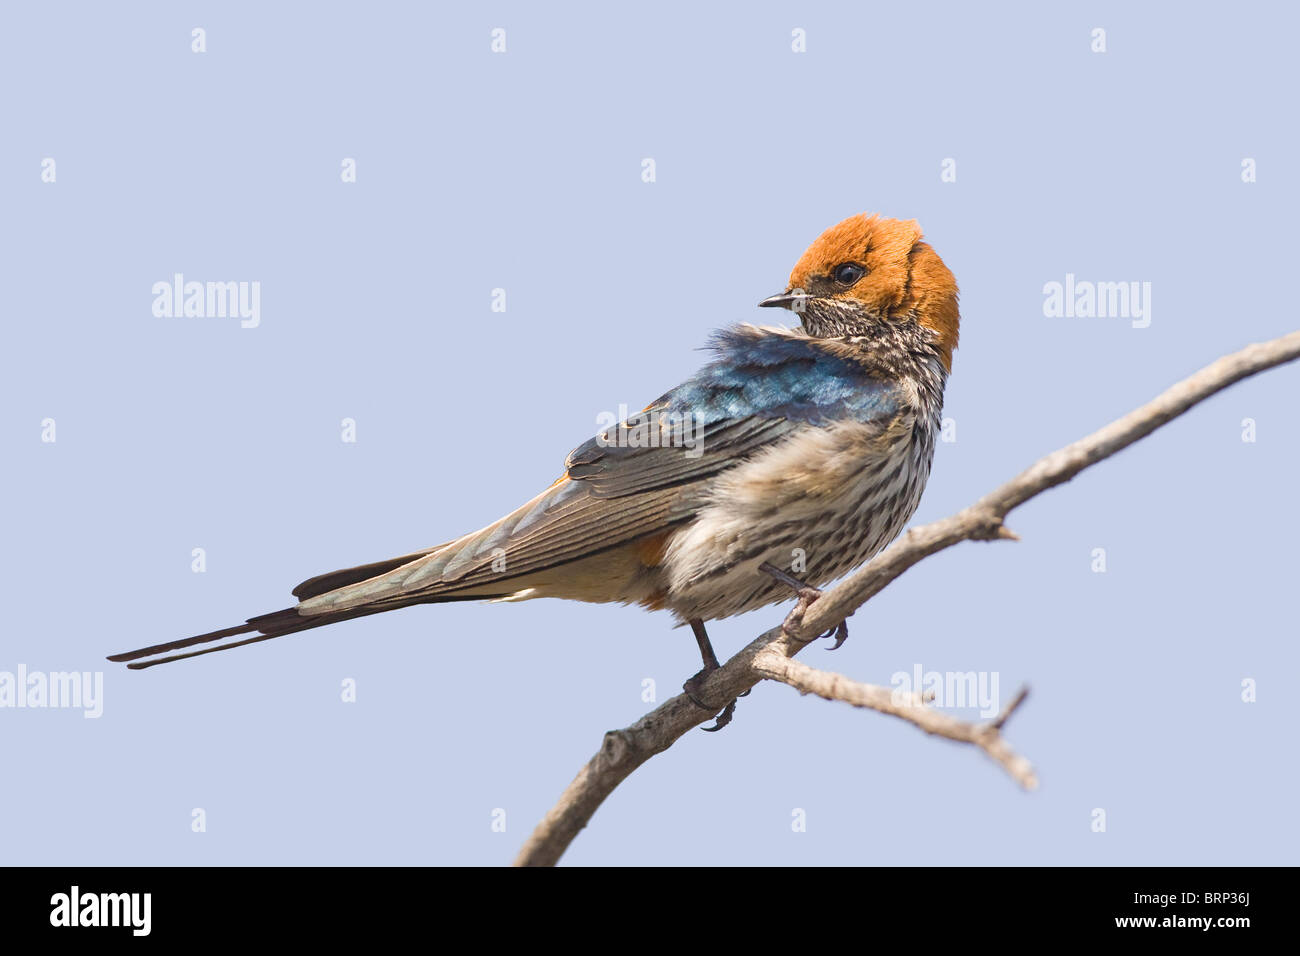 Lesser Striped Swallow perched on a branch Stock Photo